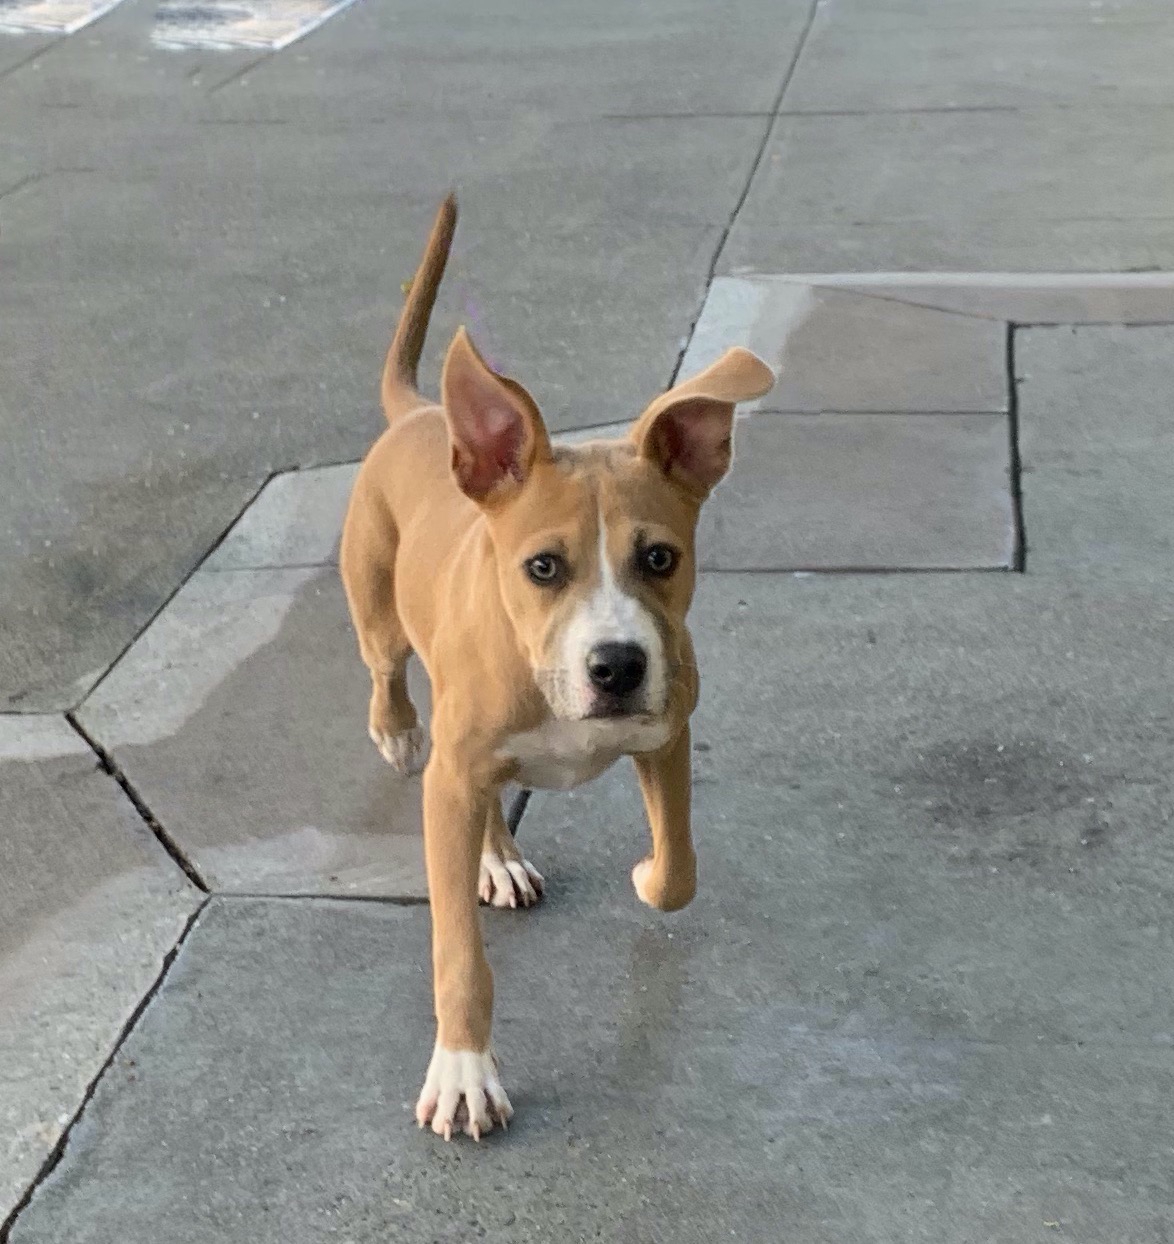 American Pit Bull Terrier Boxer Mix Puppy Running